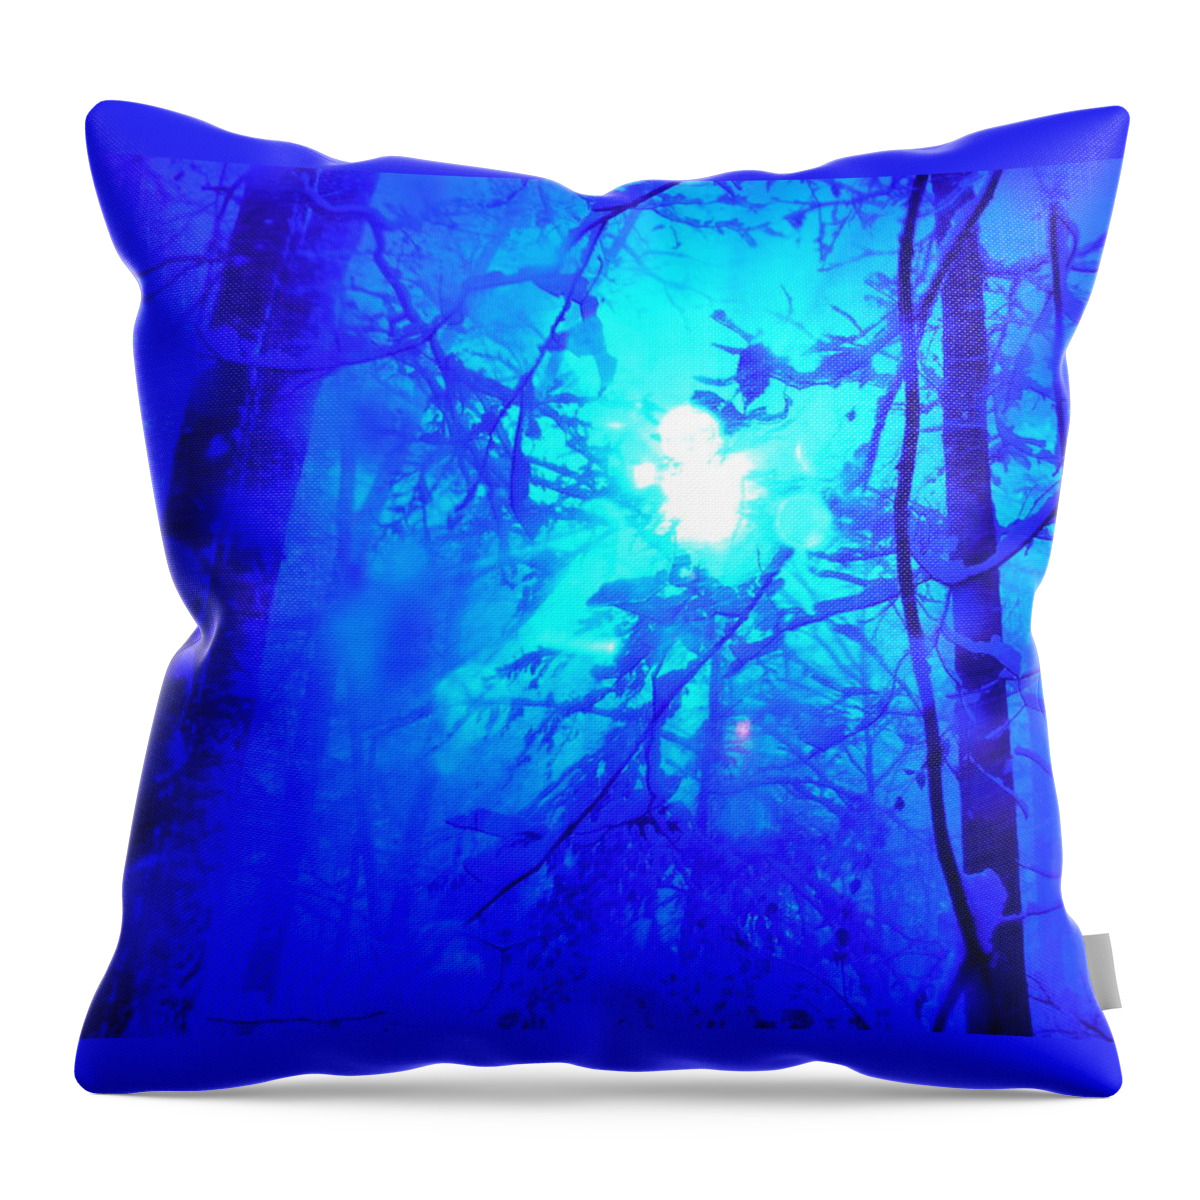 Snow Colors Series Throw Pillow featuring the photograph Snow Colors Series 11 by Paddy Shaffer